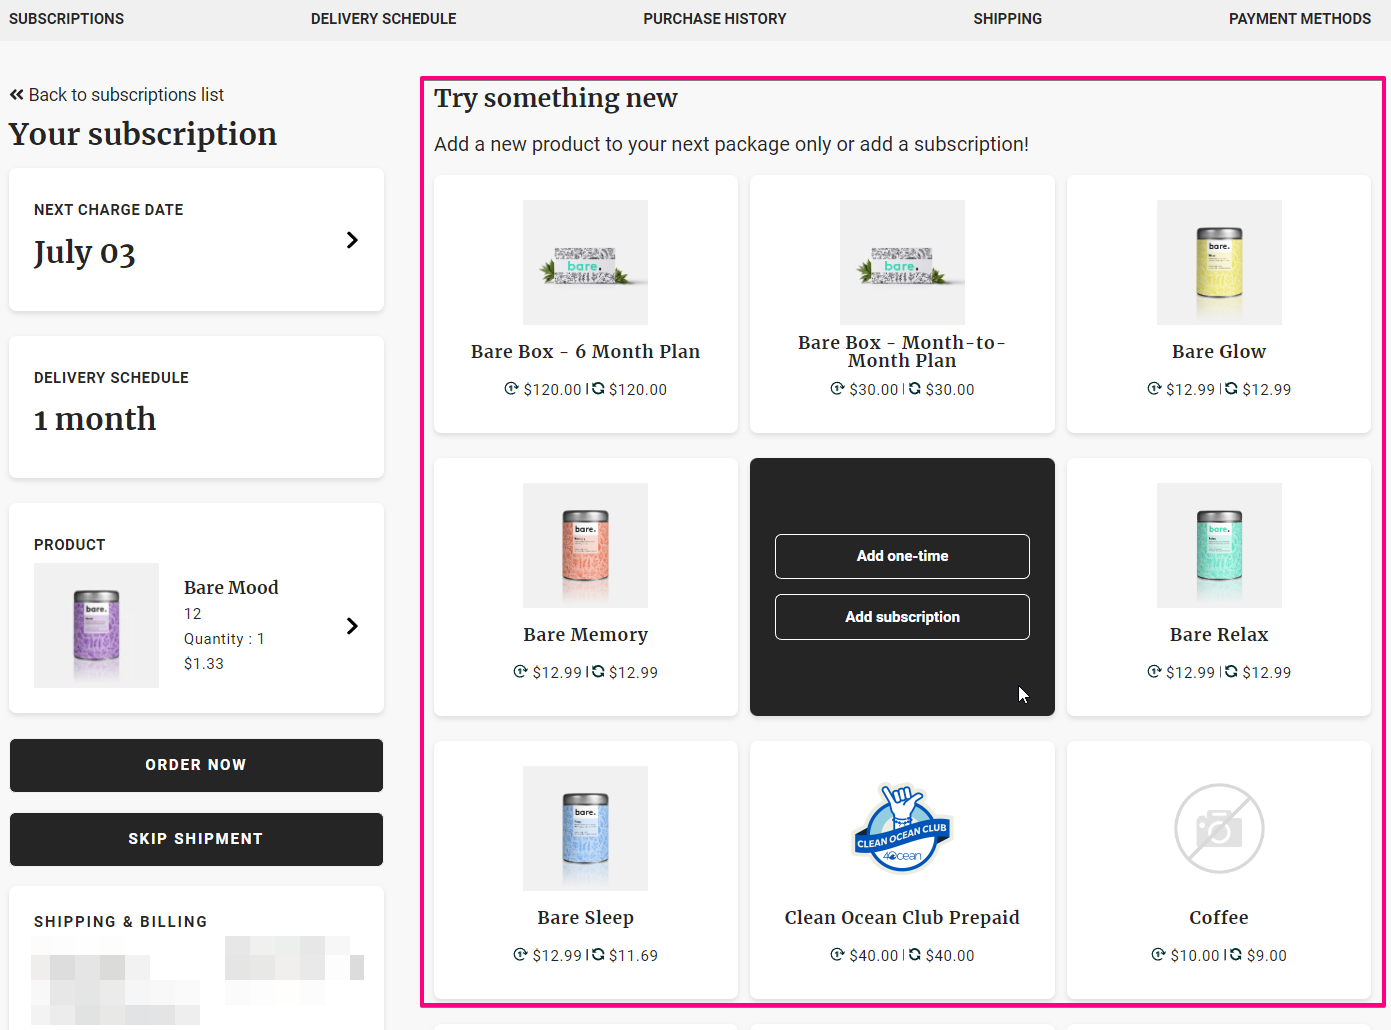 Highlights try something new section where several add-on products are listed to be added as subscription or one-time product